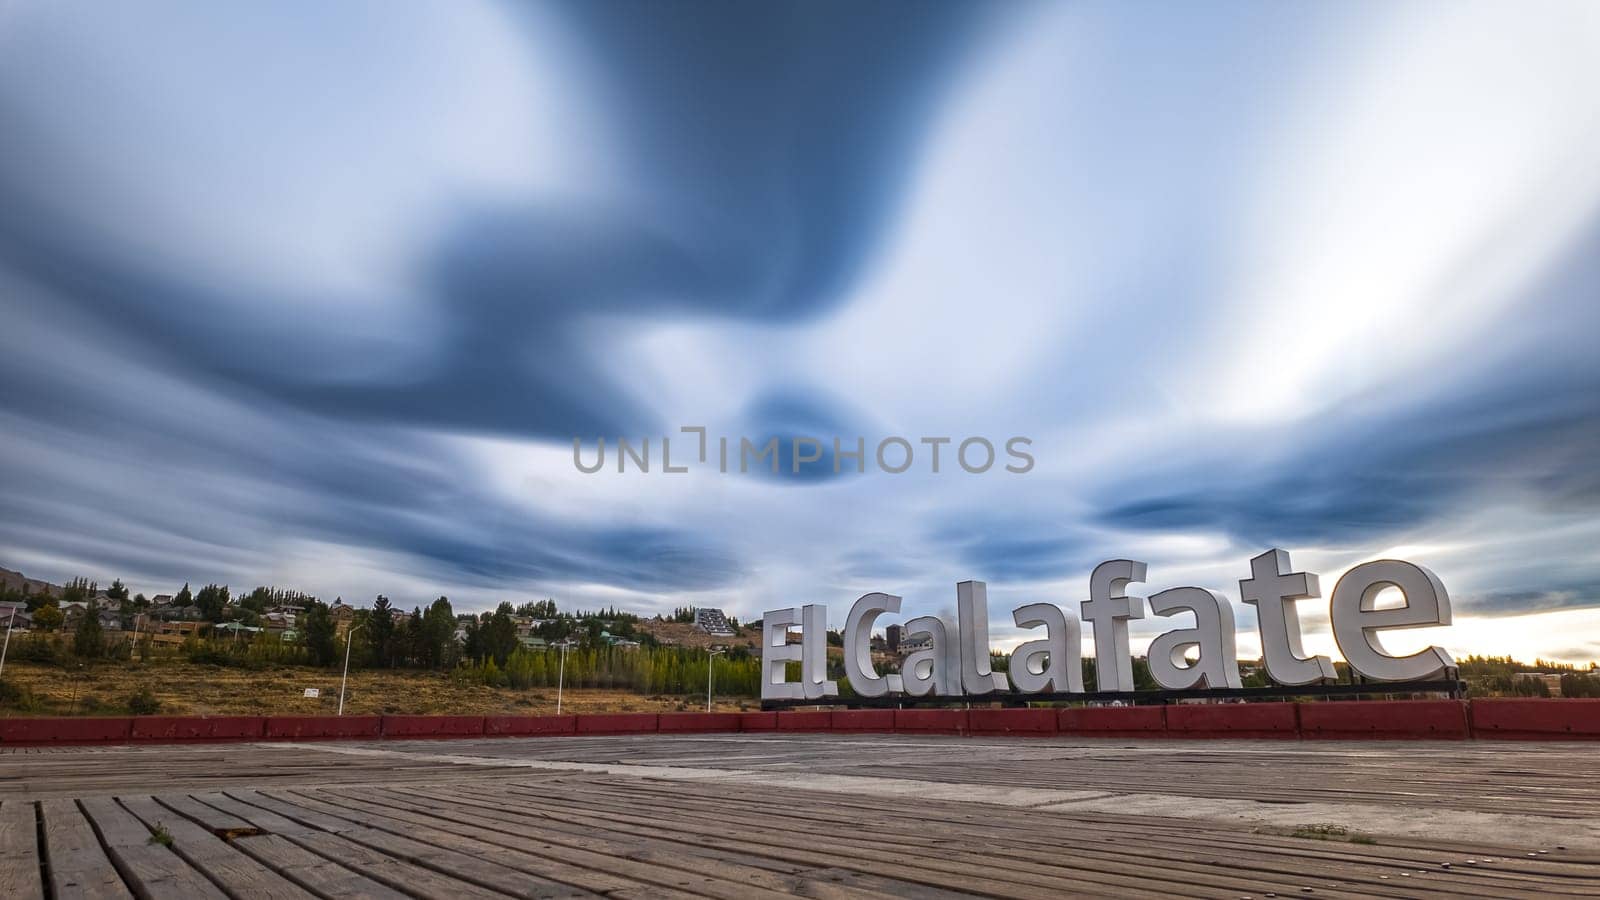 A long exposure photo captures dark, swirling clouds over the El Calafate sign, creating a dramatic scene.